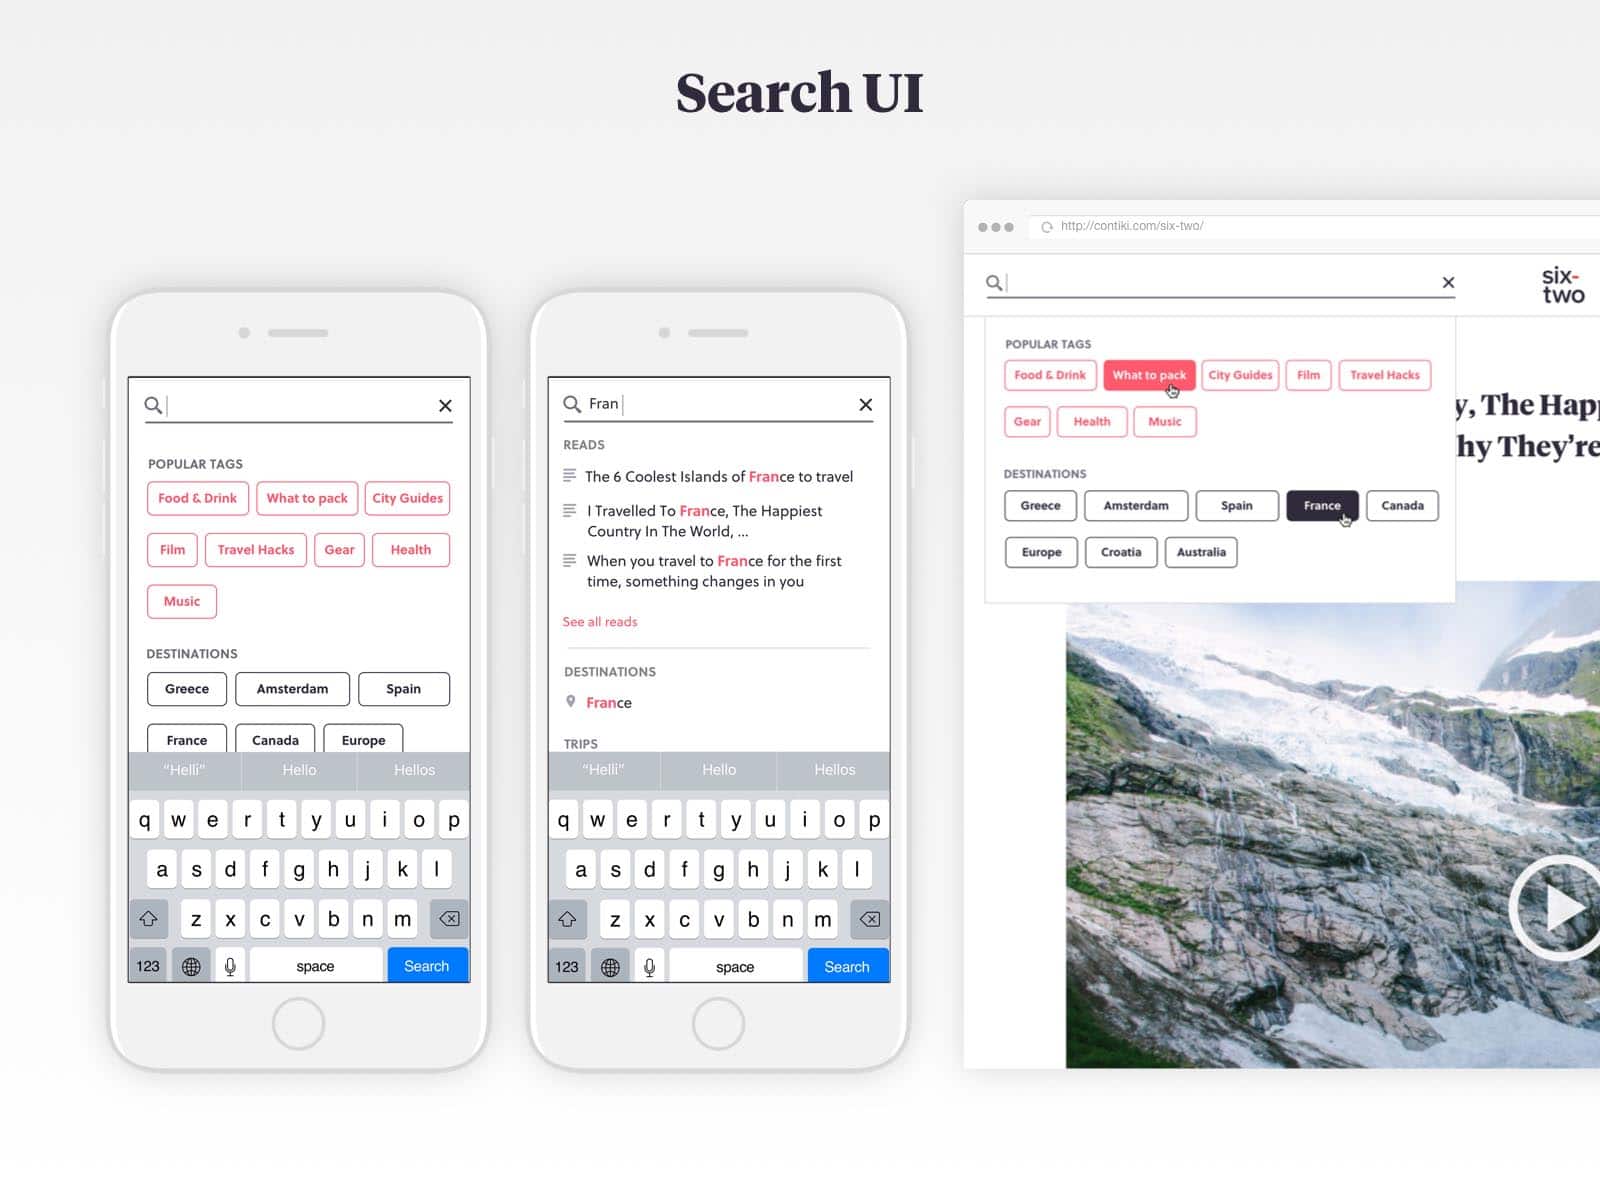 six-two search UI design